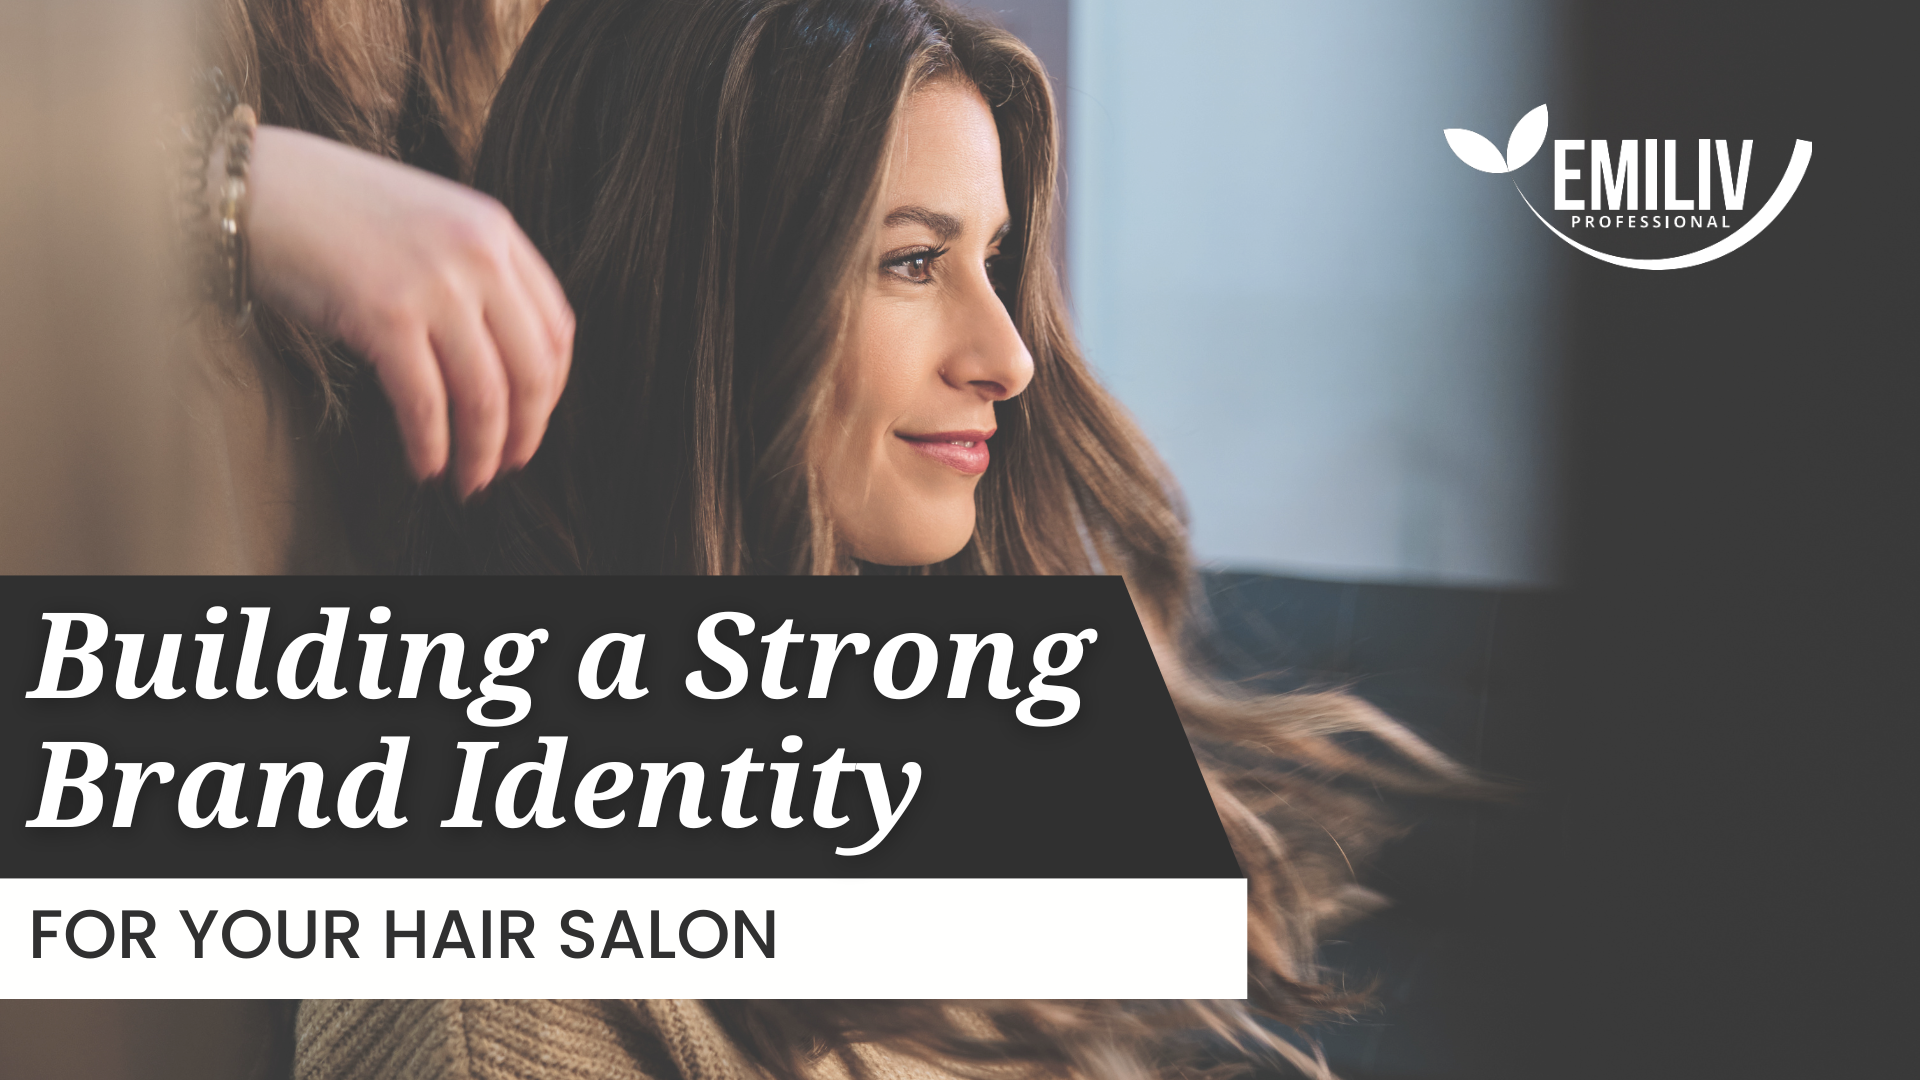 Building a Strong Brand Identity for Your Hair Salon